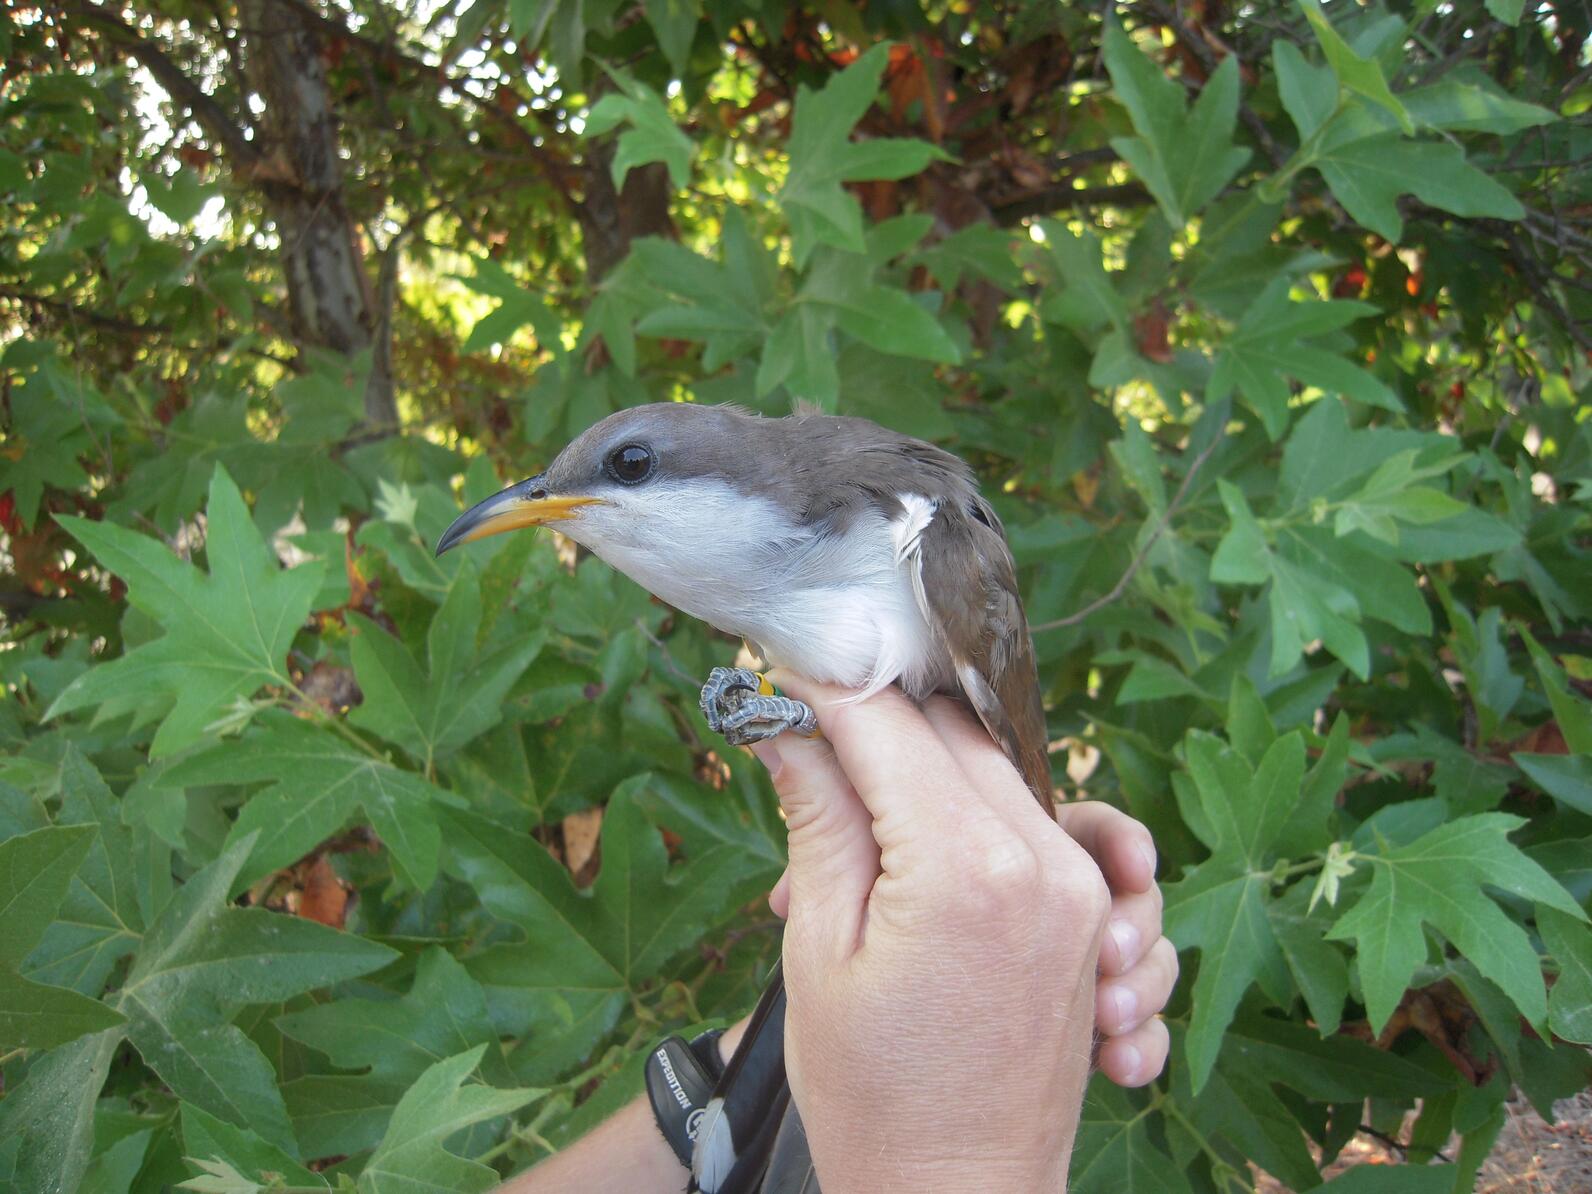 A Western Yellow-billed Cuckoo in a hand.